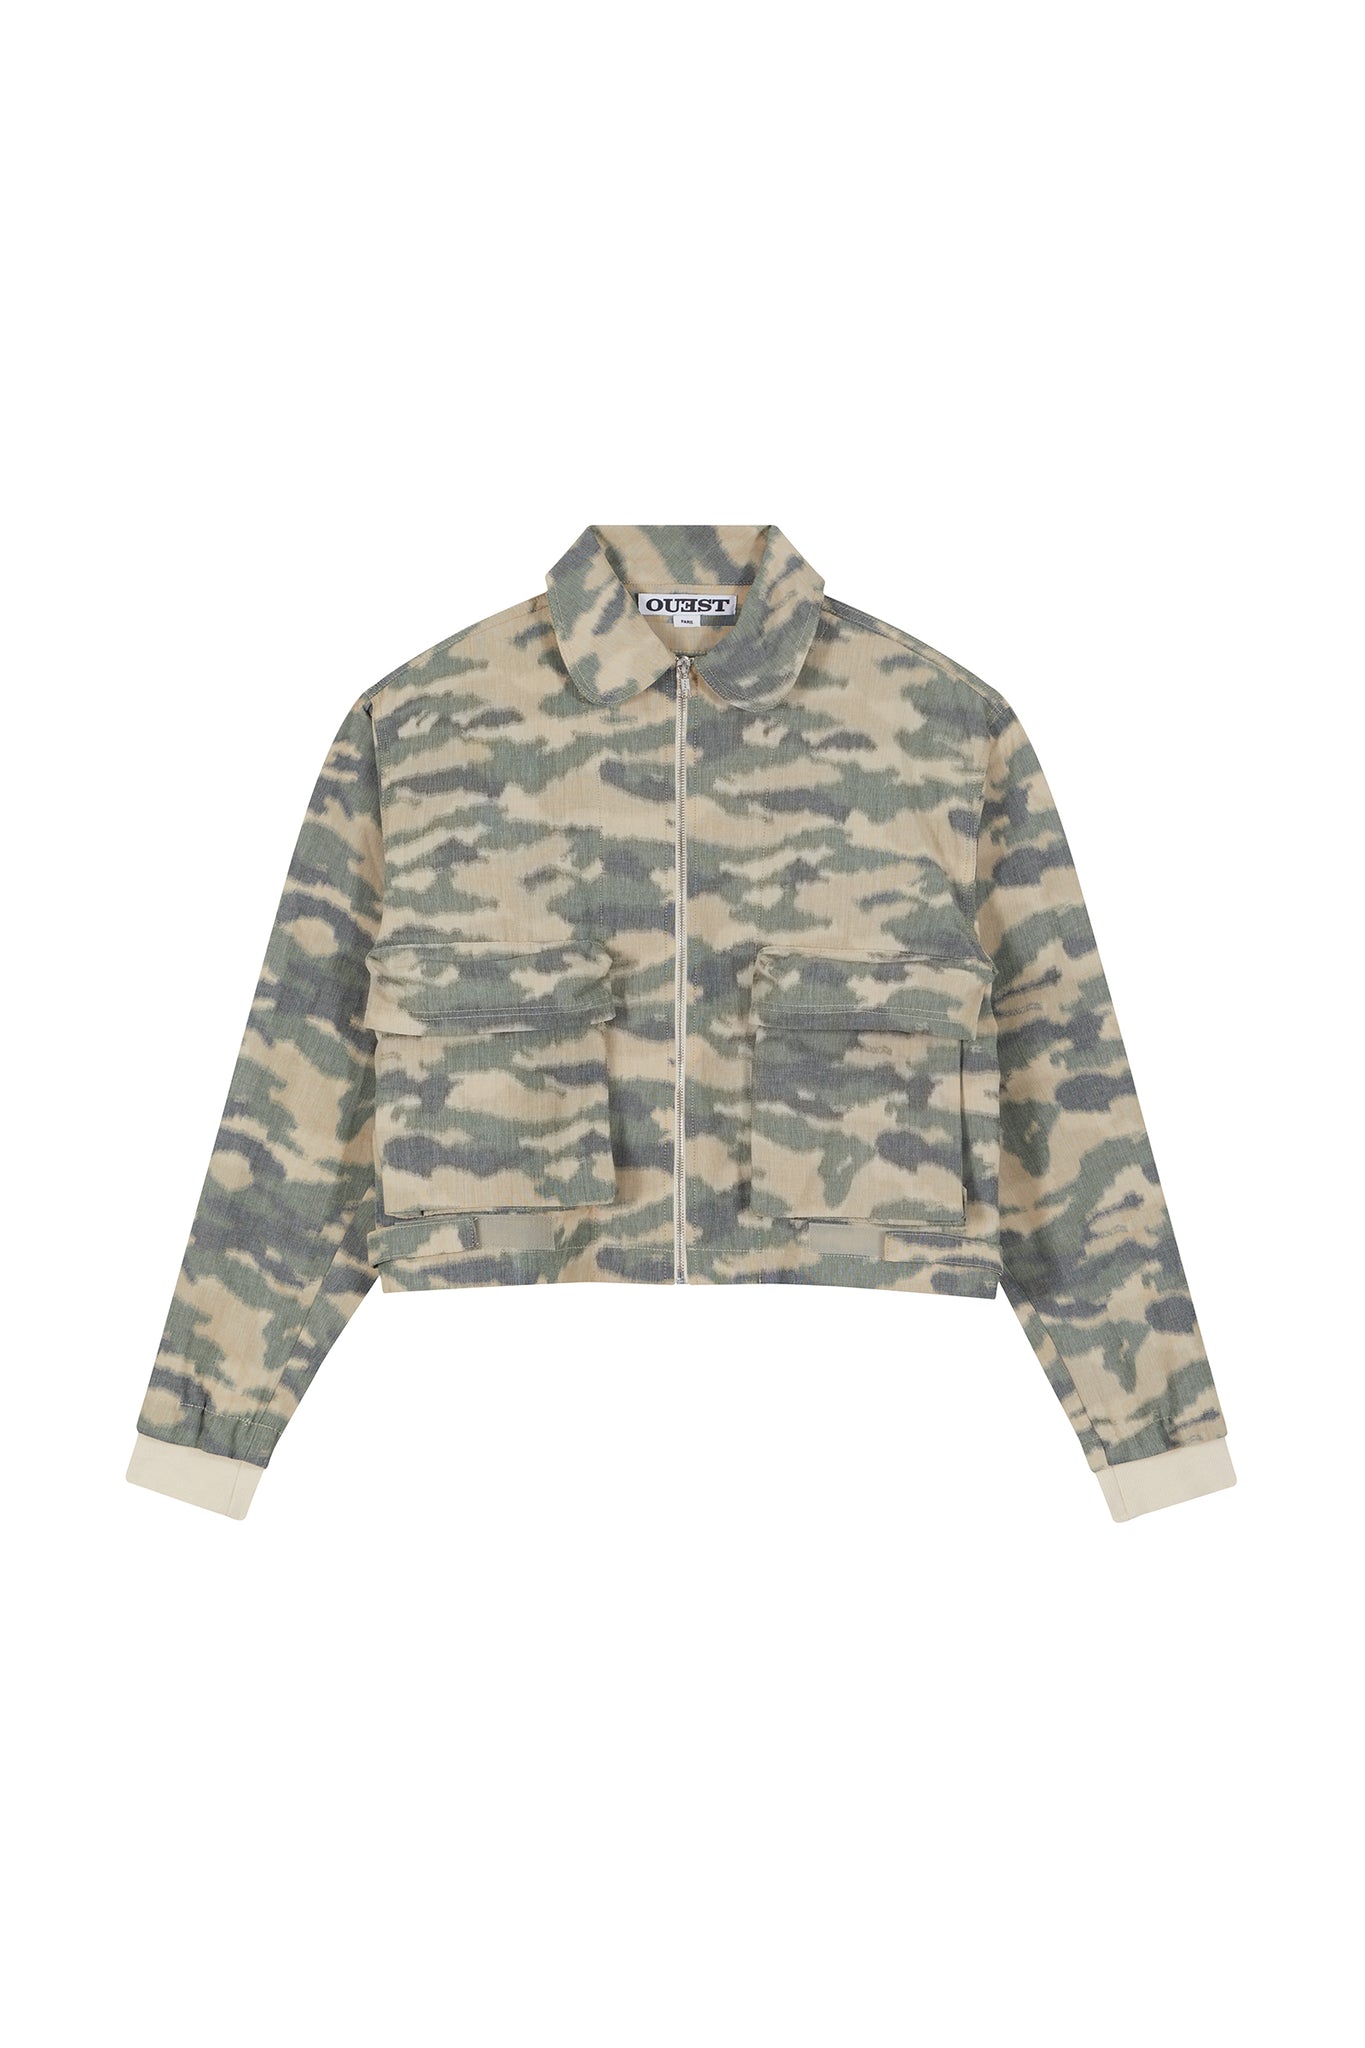 THE ASTRO JACKET IN CAMOUFLAGE COTTON